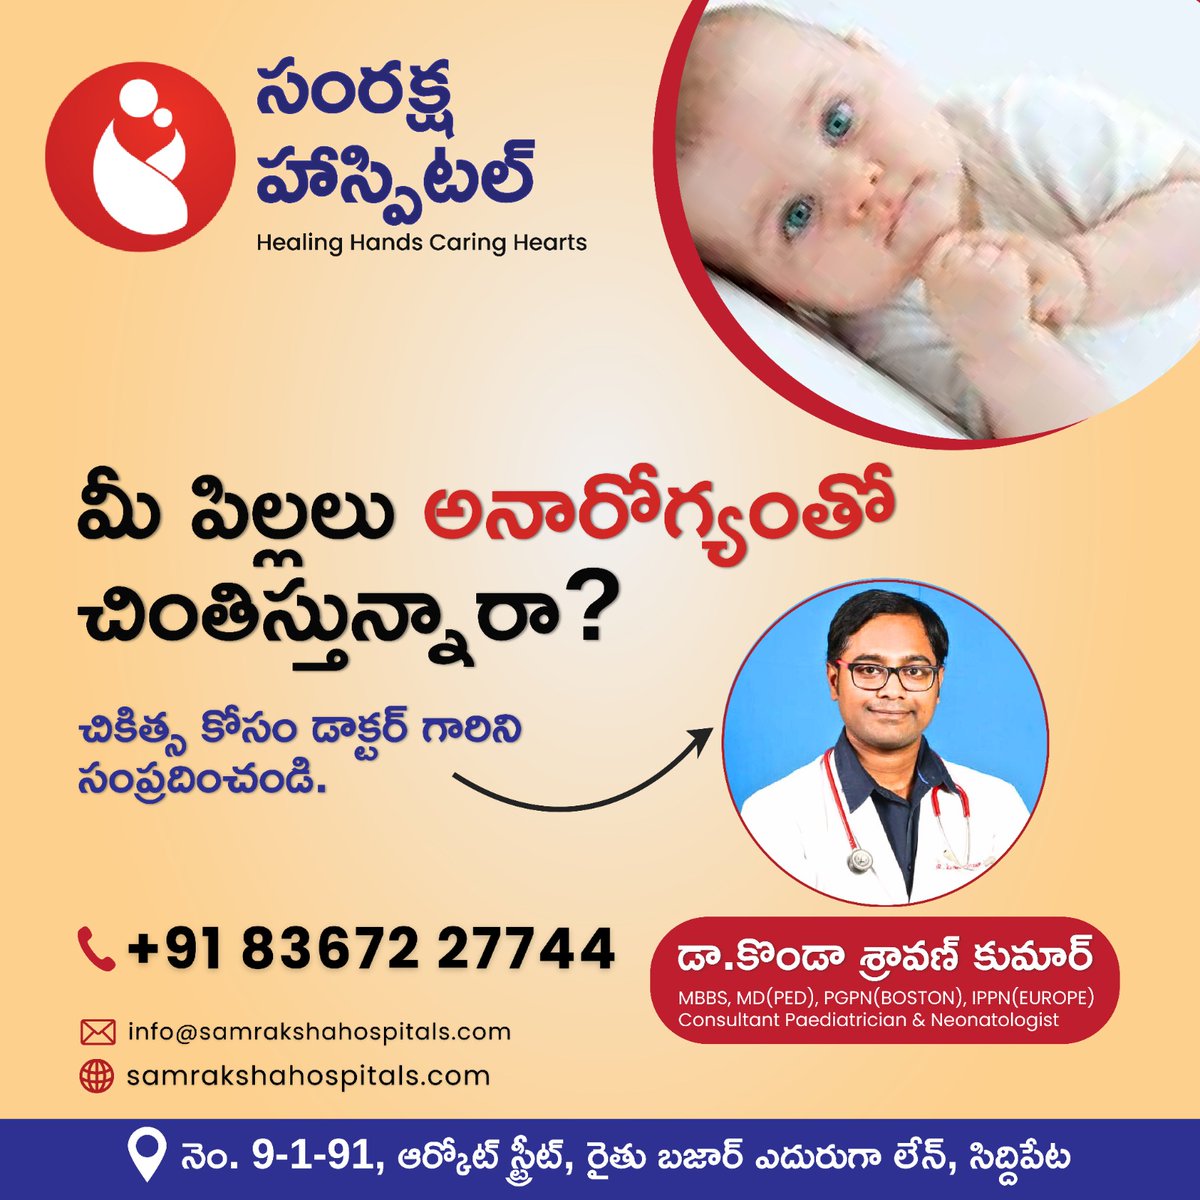 🚨 Attention Parents! 🚨 If your little ones are facing health challenges, don't navigate it alone! Dr. Shravankumar is here to provide expert pediatric care and support. Let's prioritize our children's health together. #ChildrensHealth #Parenting #PediatricCare #DrShravankumar